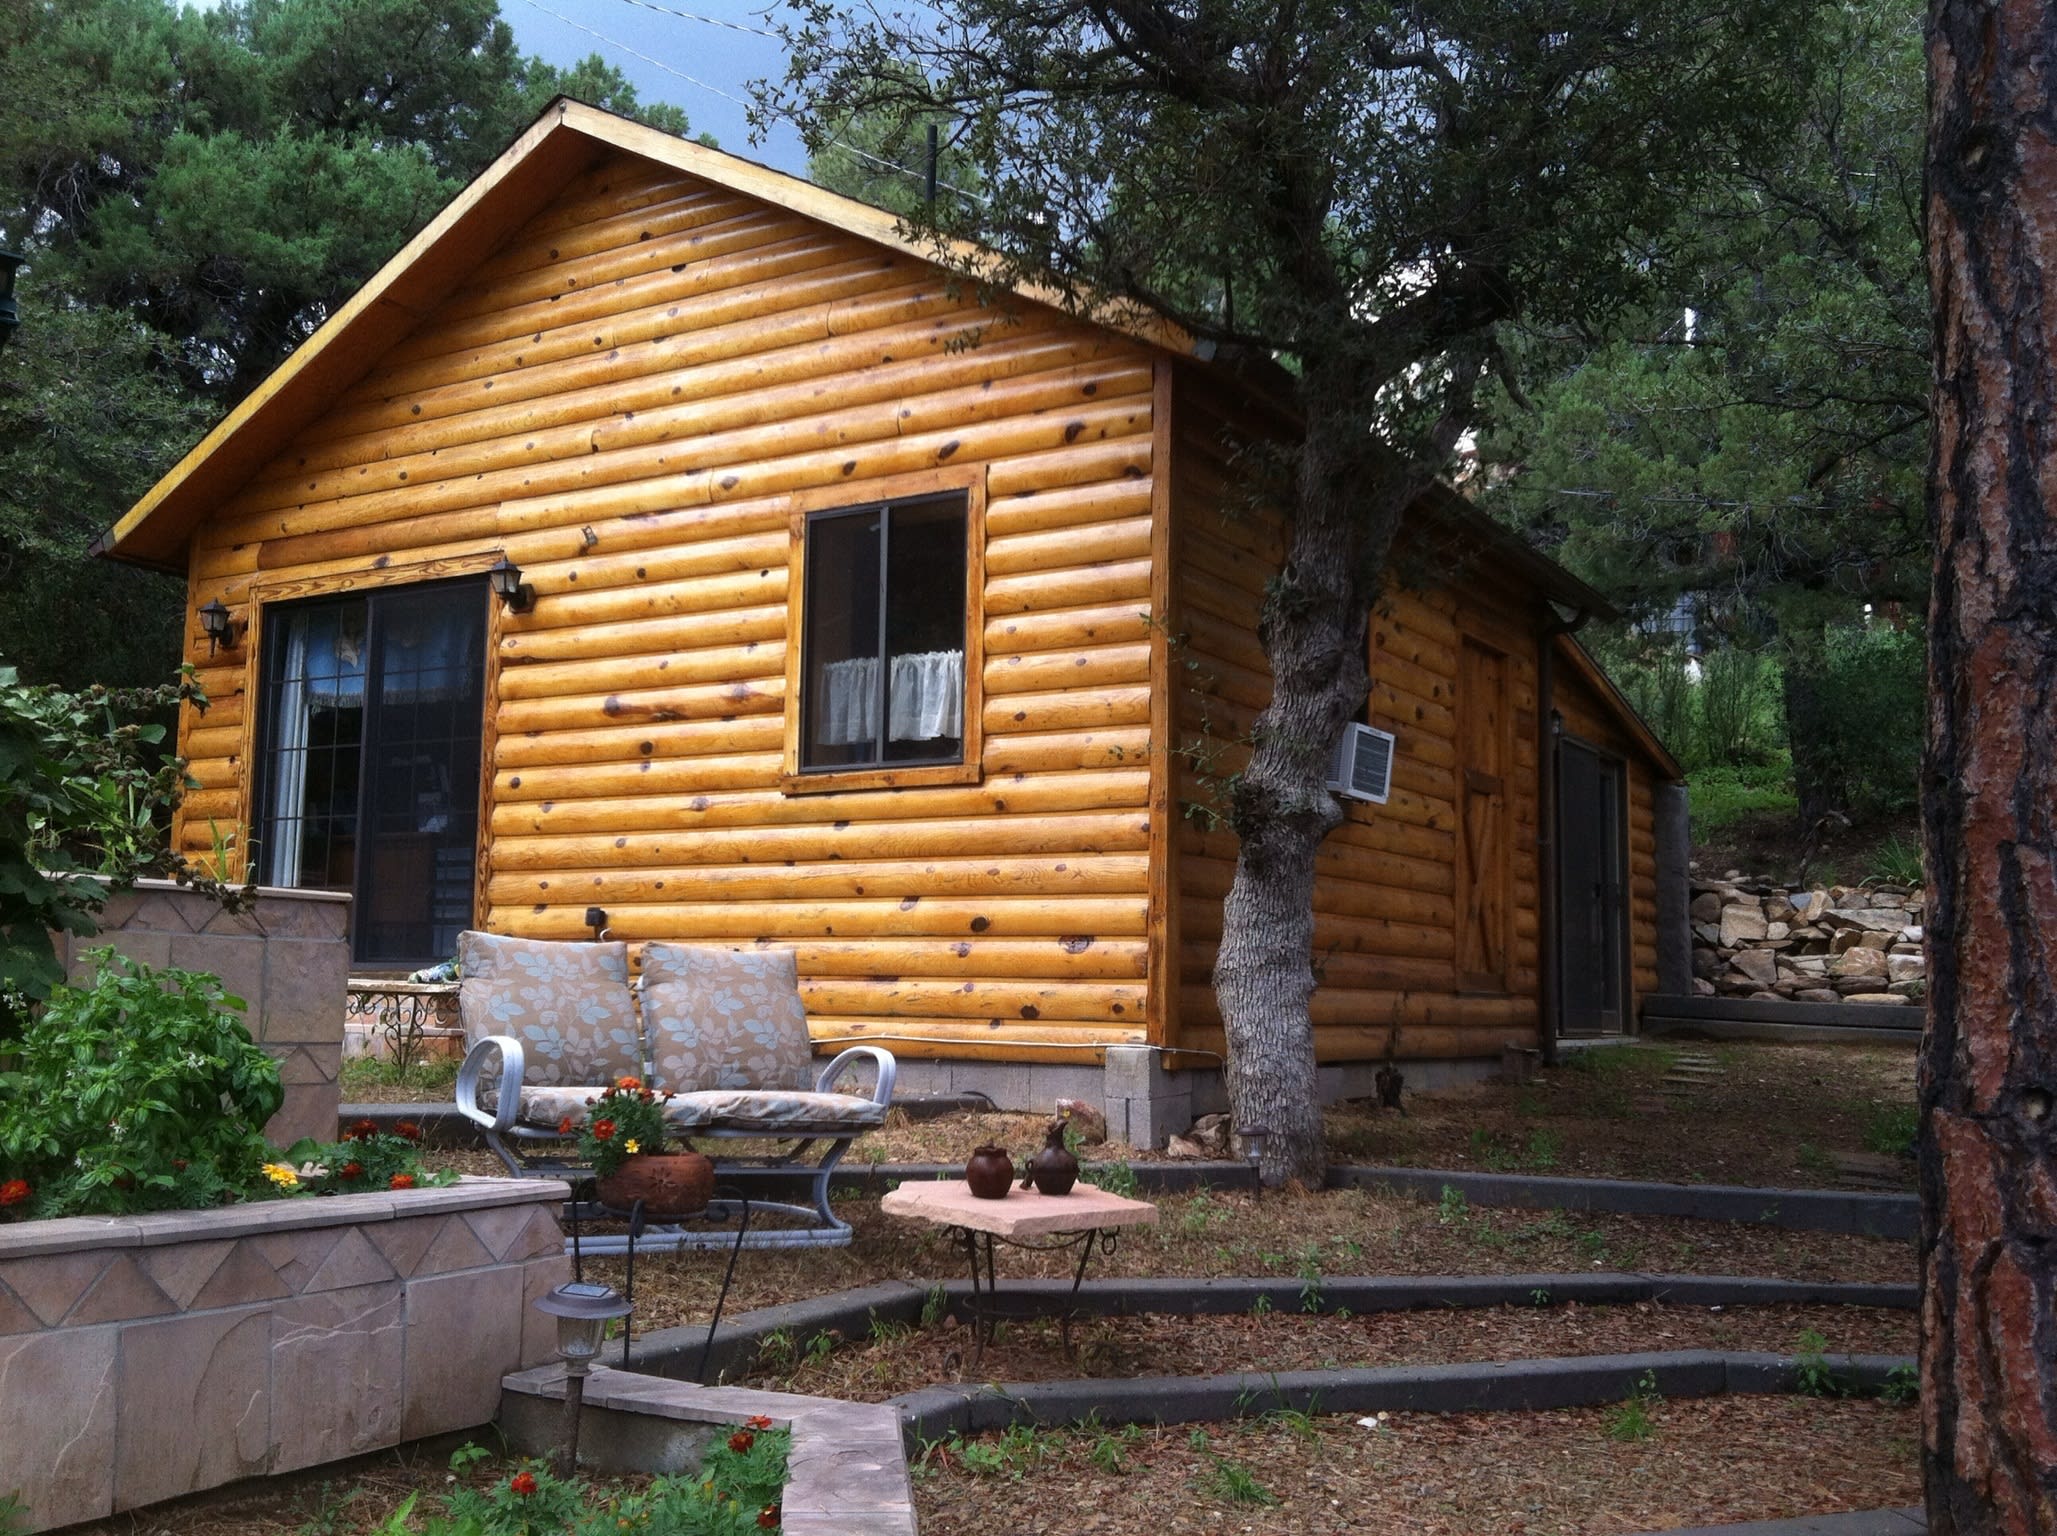 575 sq ft cabin/ guest house on our property we give you your privacy but we are on property if you need any assistance or to borrow anything you forgot always glad to be a good neighbor! Just let us know what we can help you with glad to do our best! 